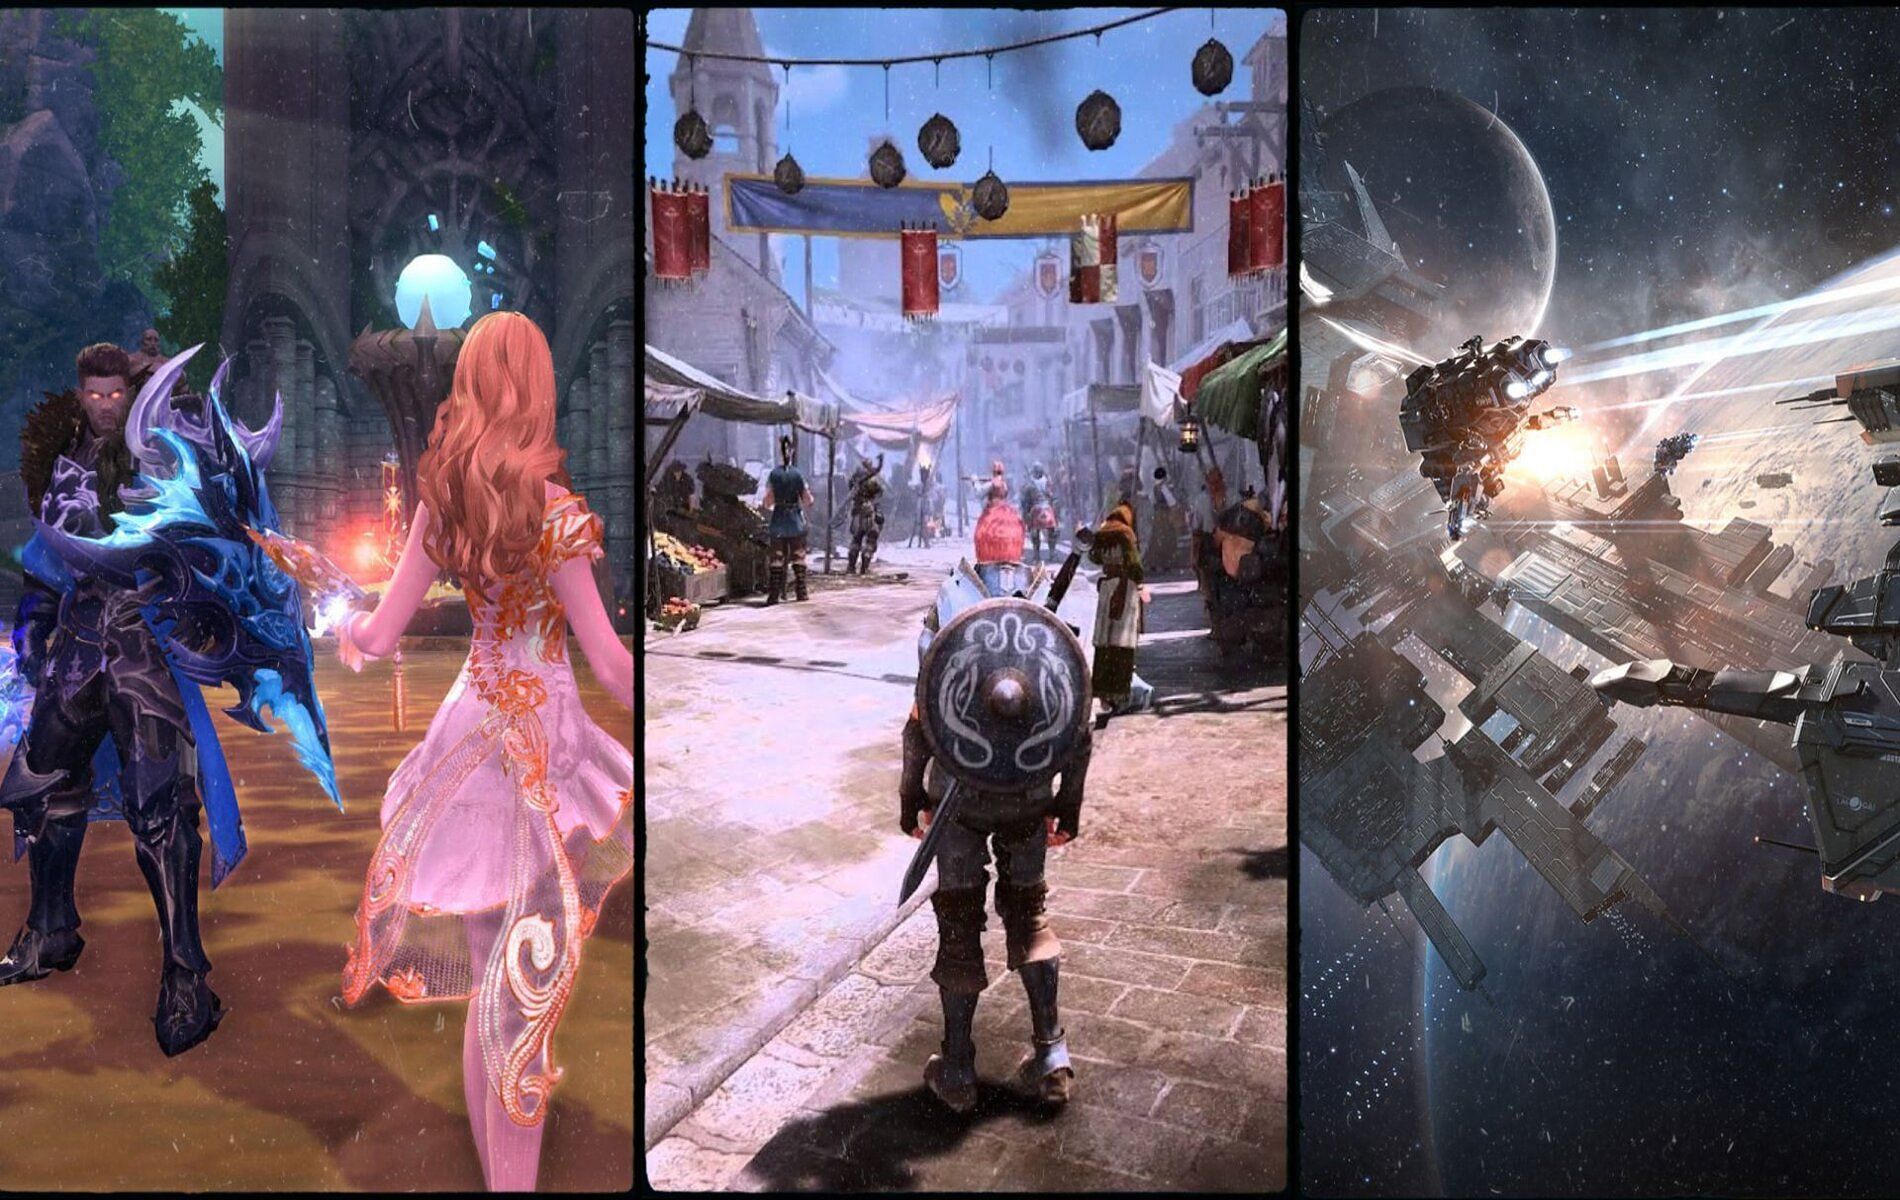 The image portrays artworks and screenshots from Aion, Black Desert Online and EVE Online